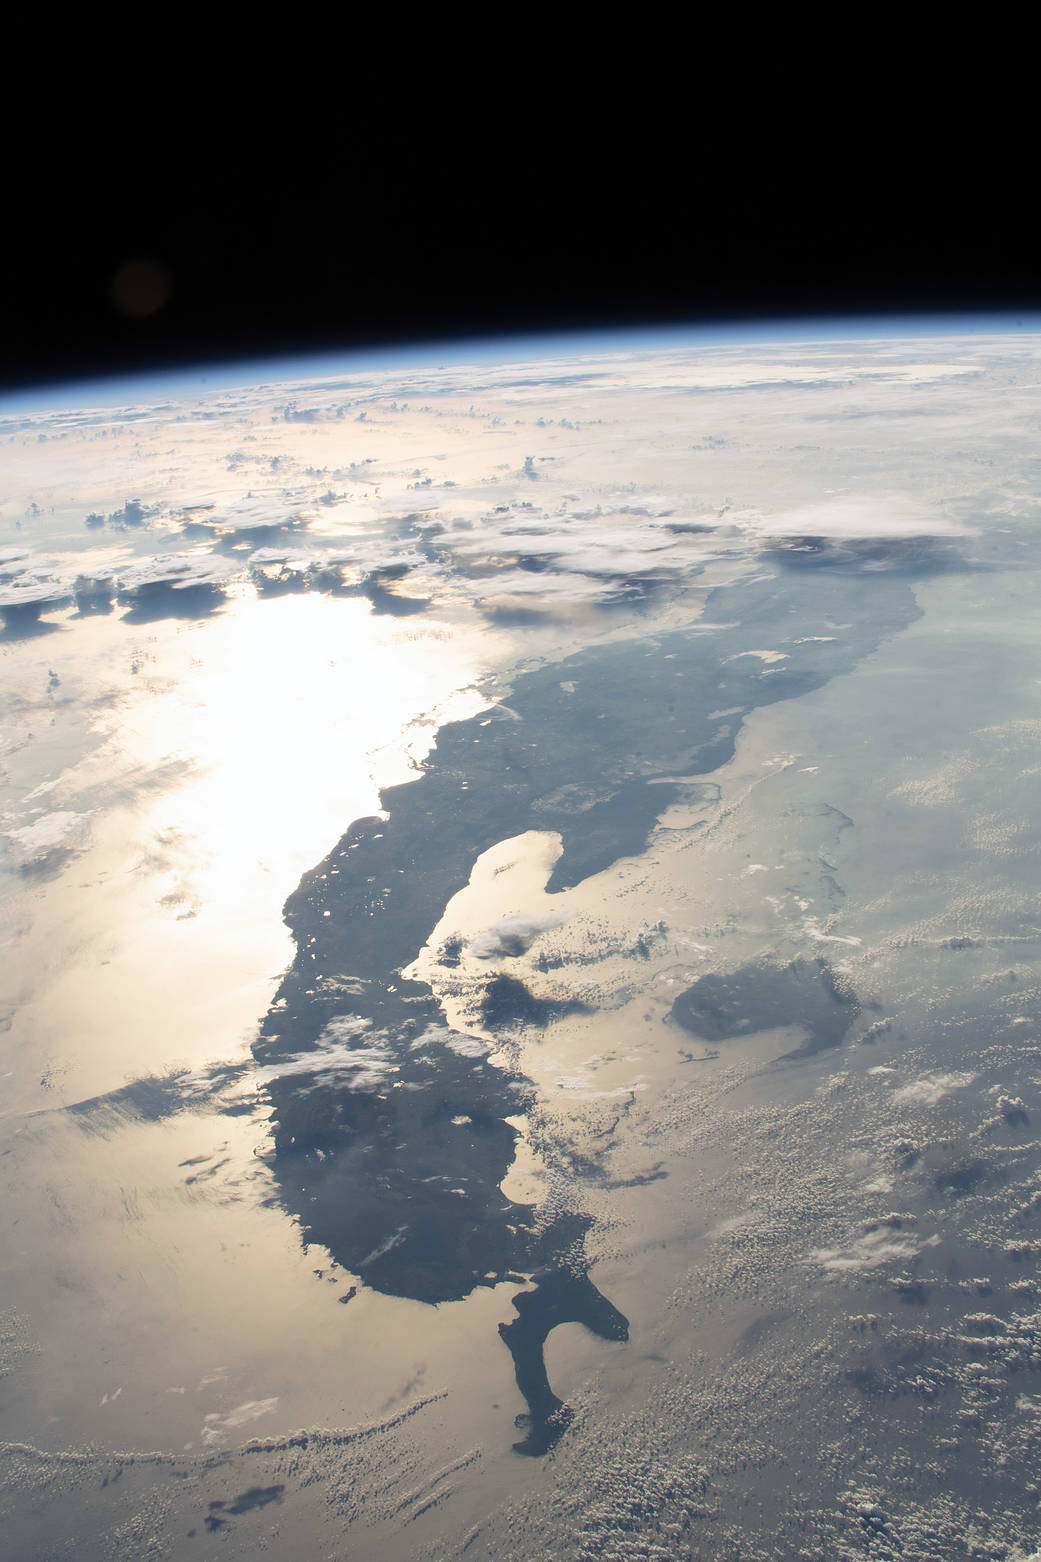 Sunglint and thunderclouds over Cuba seen from low Earth orbit